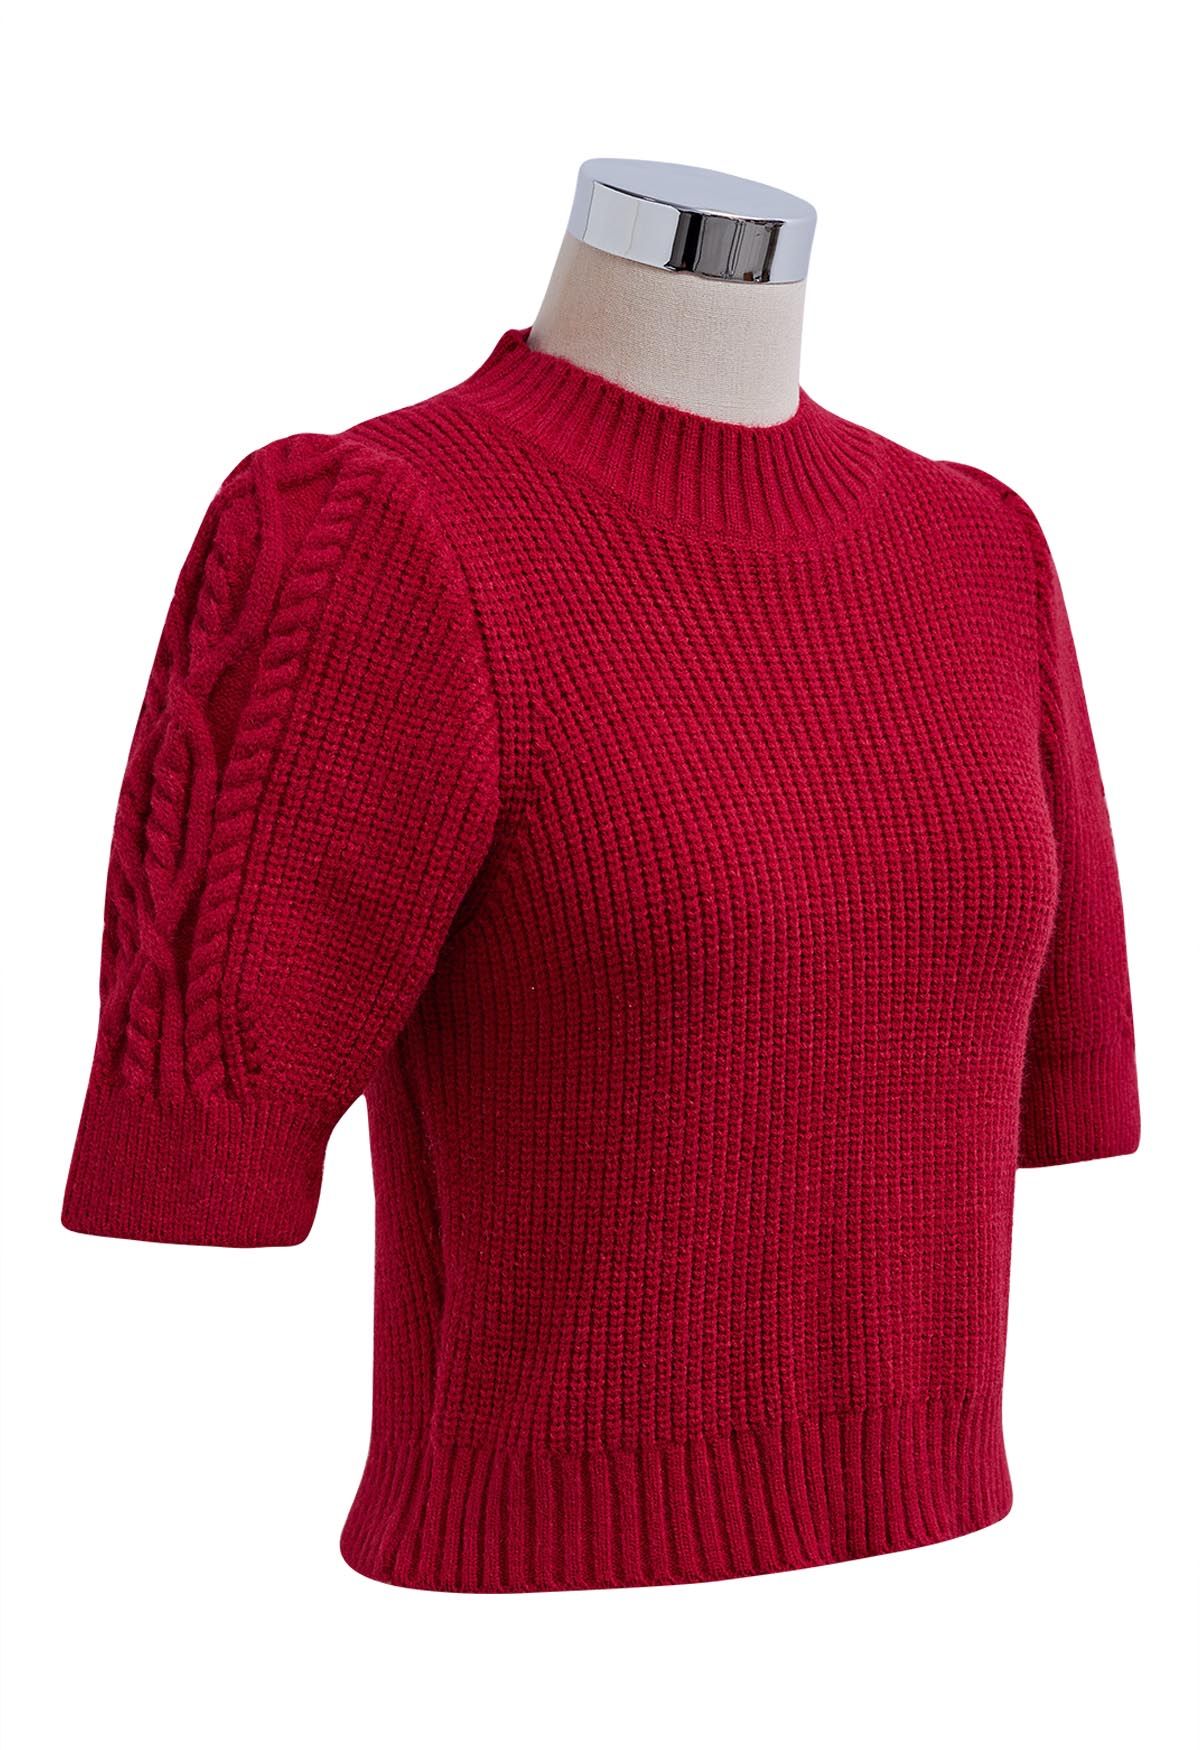 Mock Neck Short Sleeve Knit Sweater in Red - Retro, Indie and Unique ...